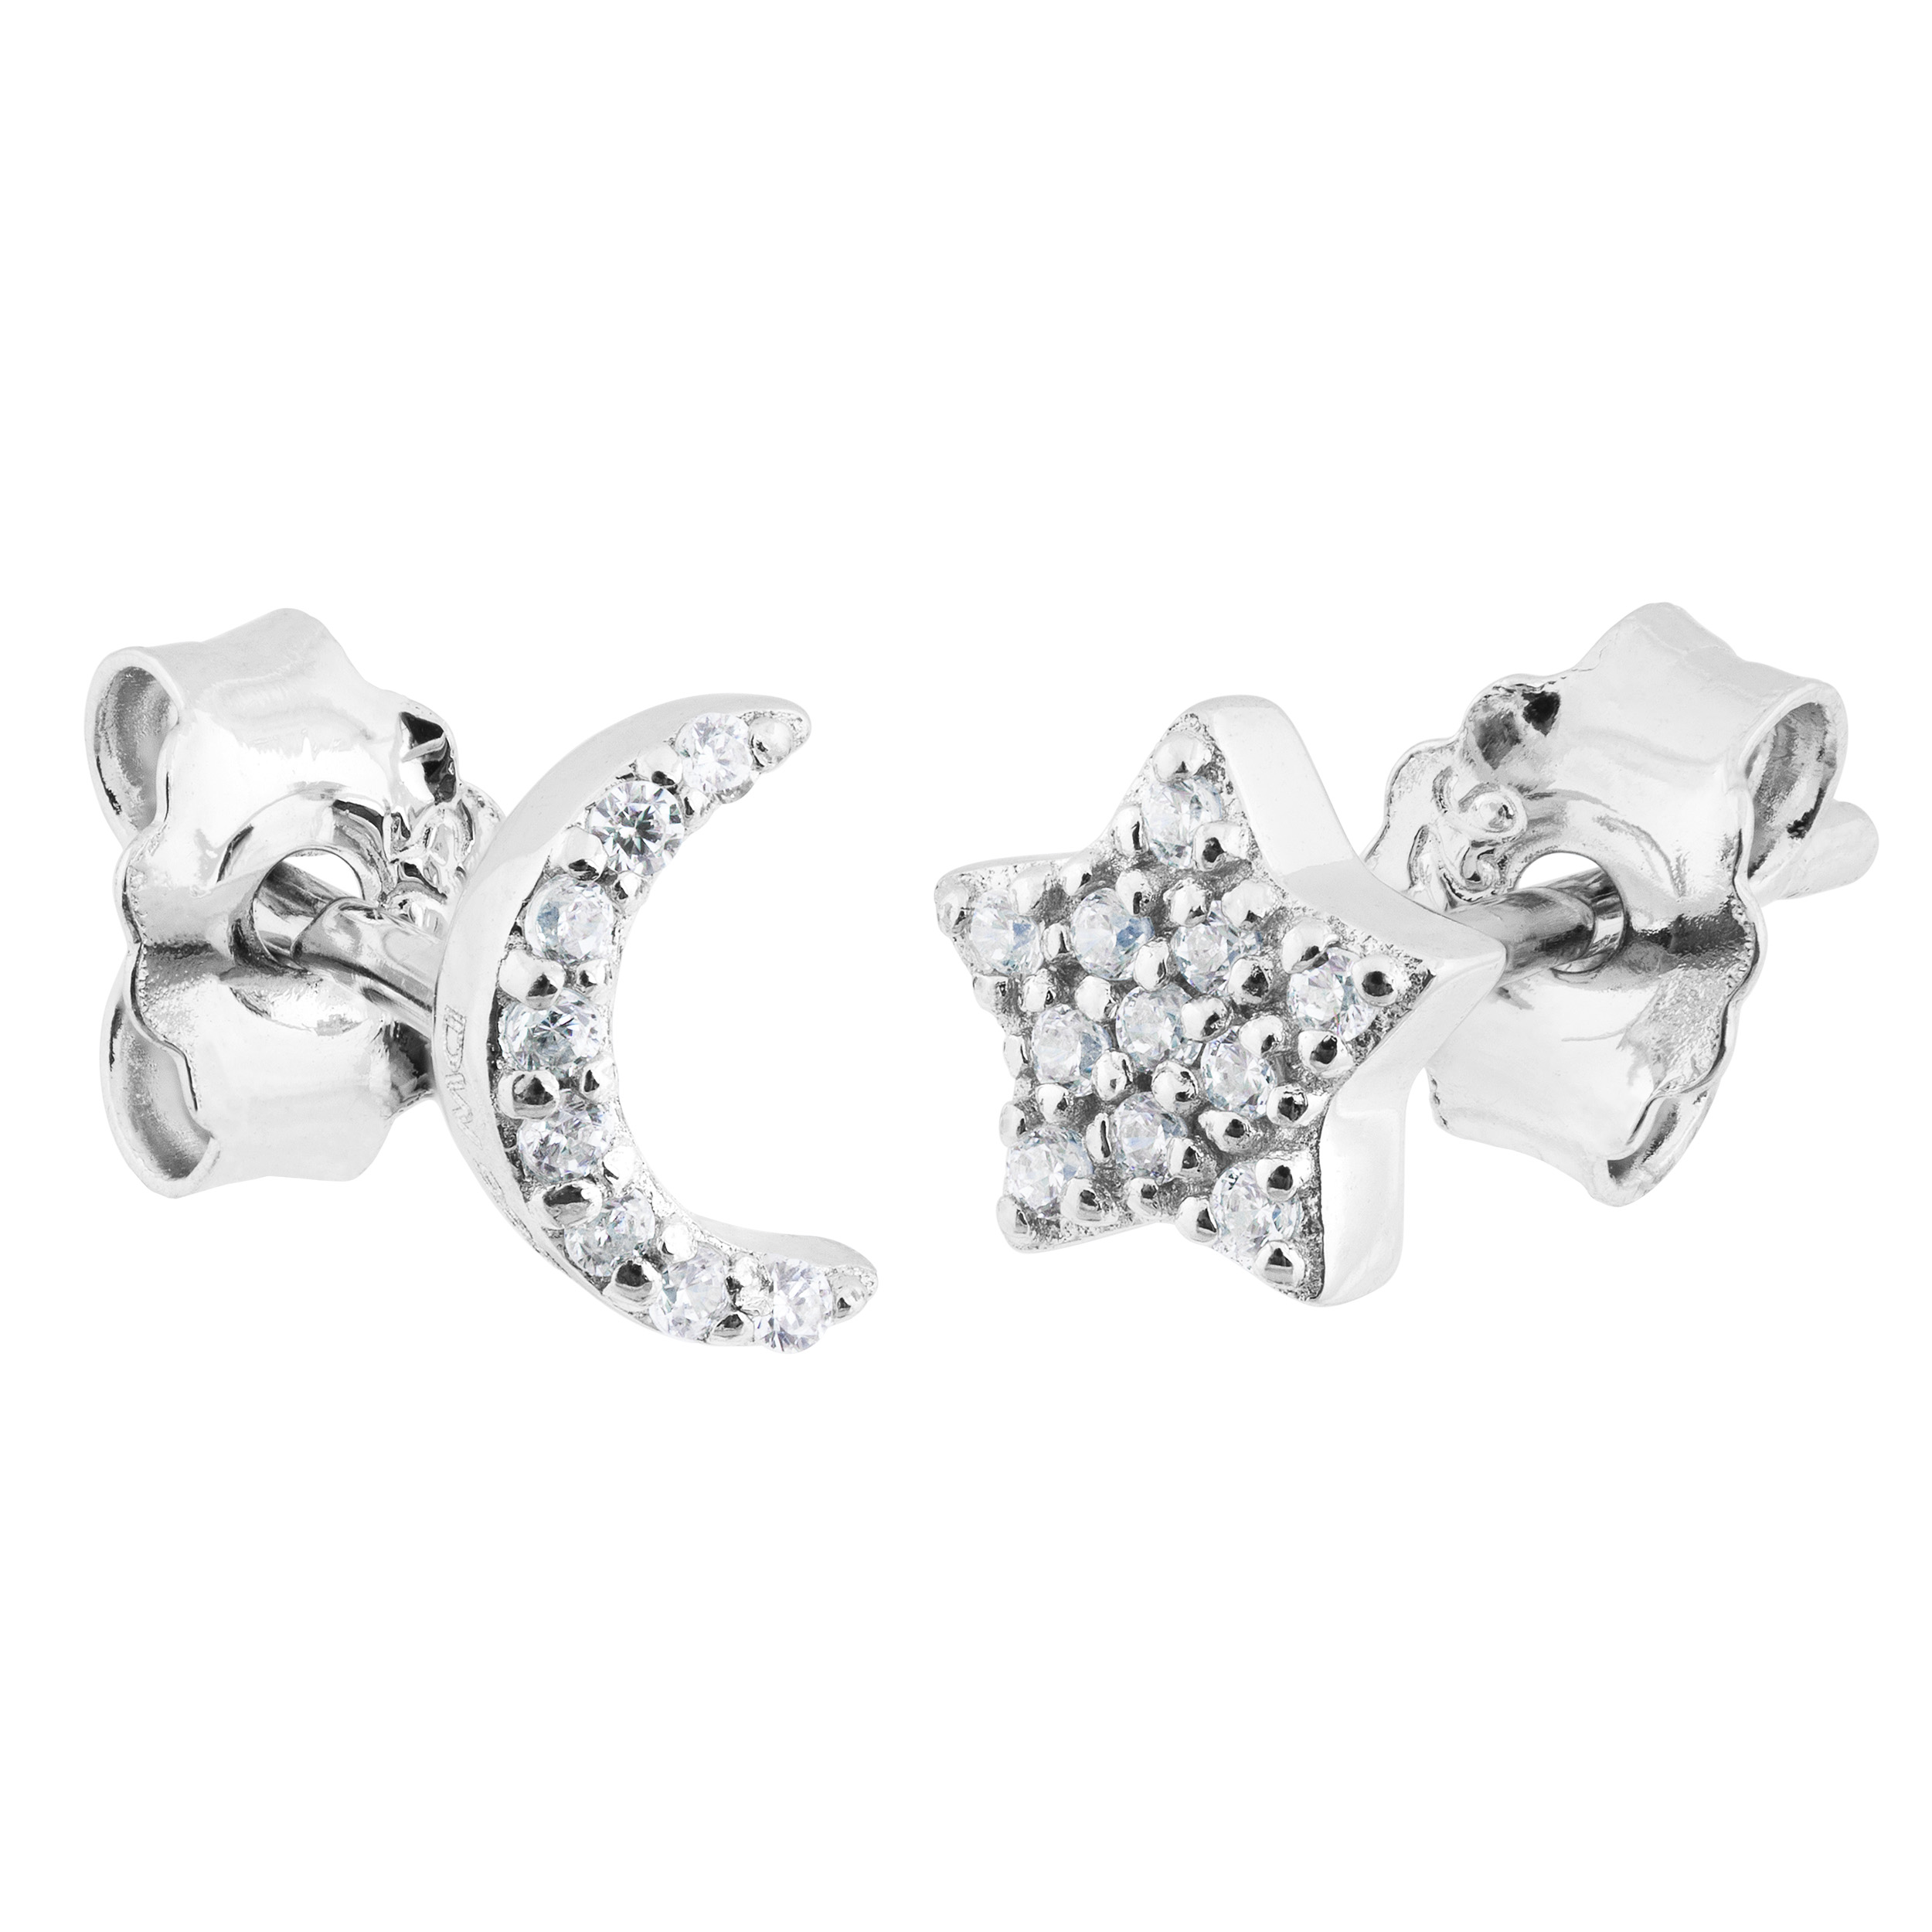 Moon and Star Stud Earrings, Rhodium Plated Sterling Silver